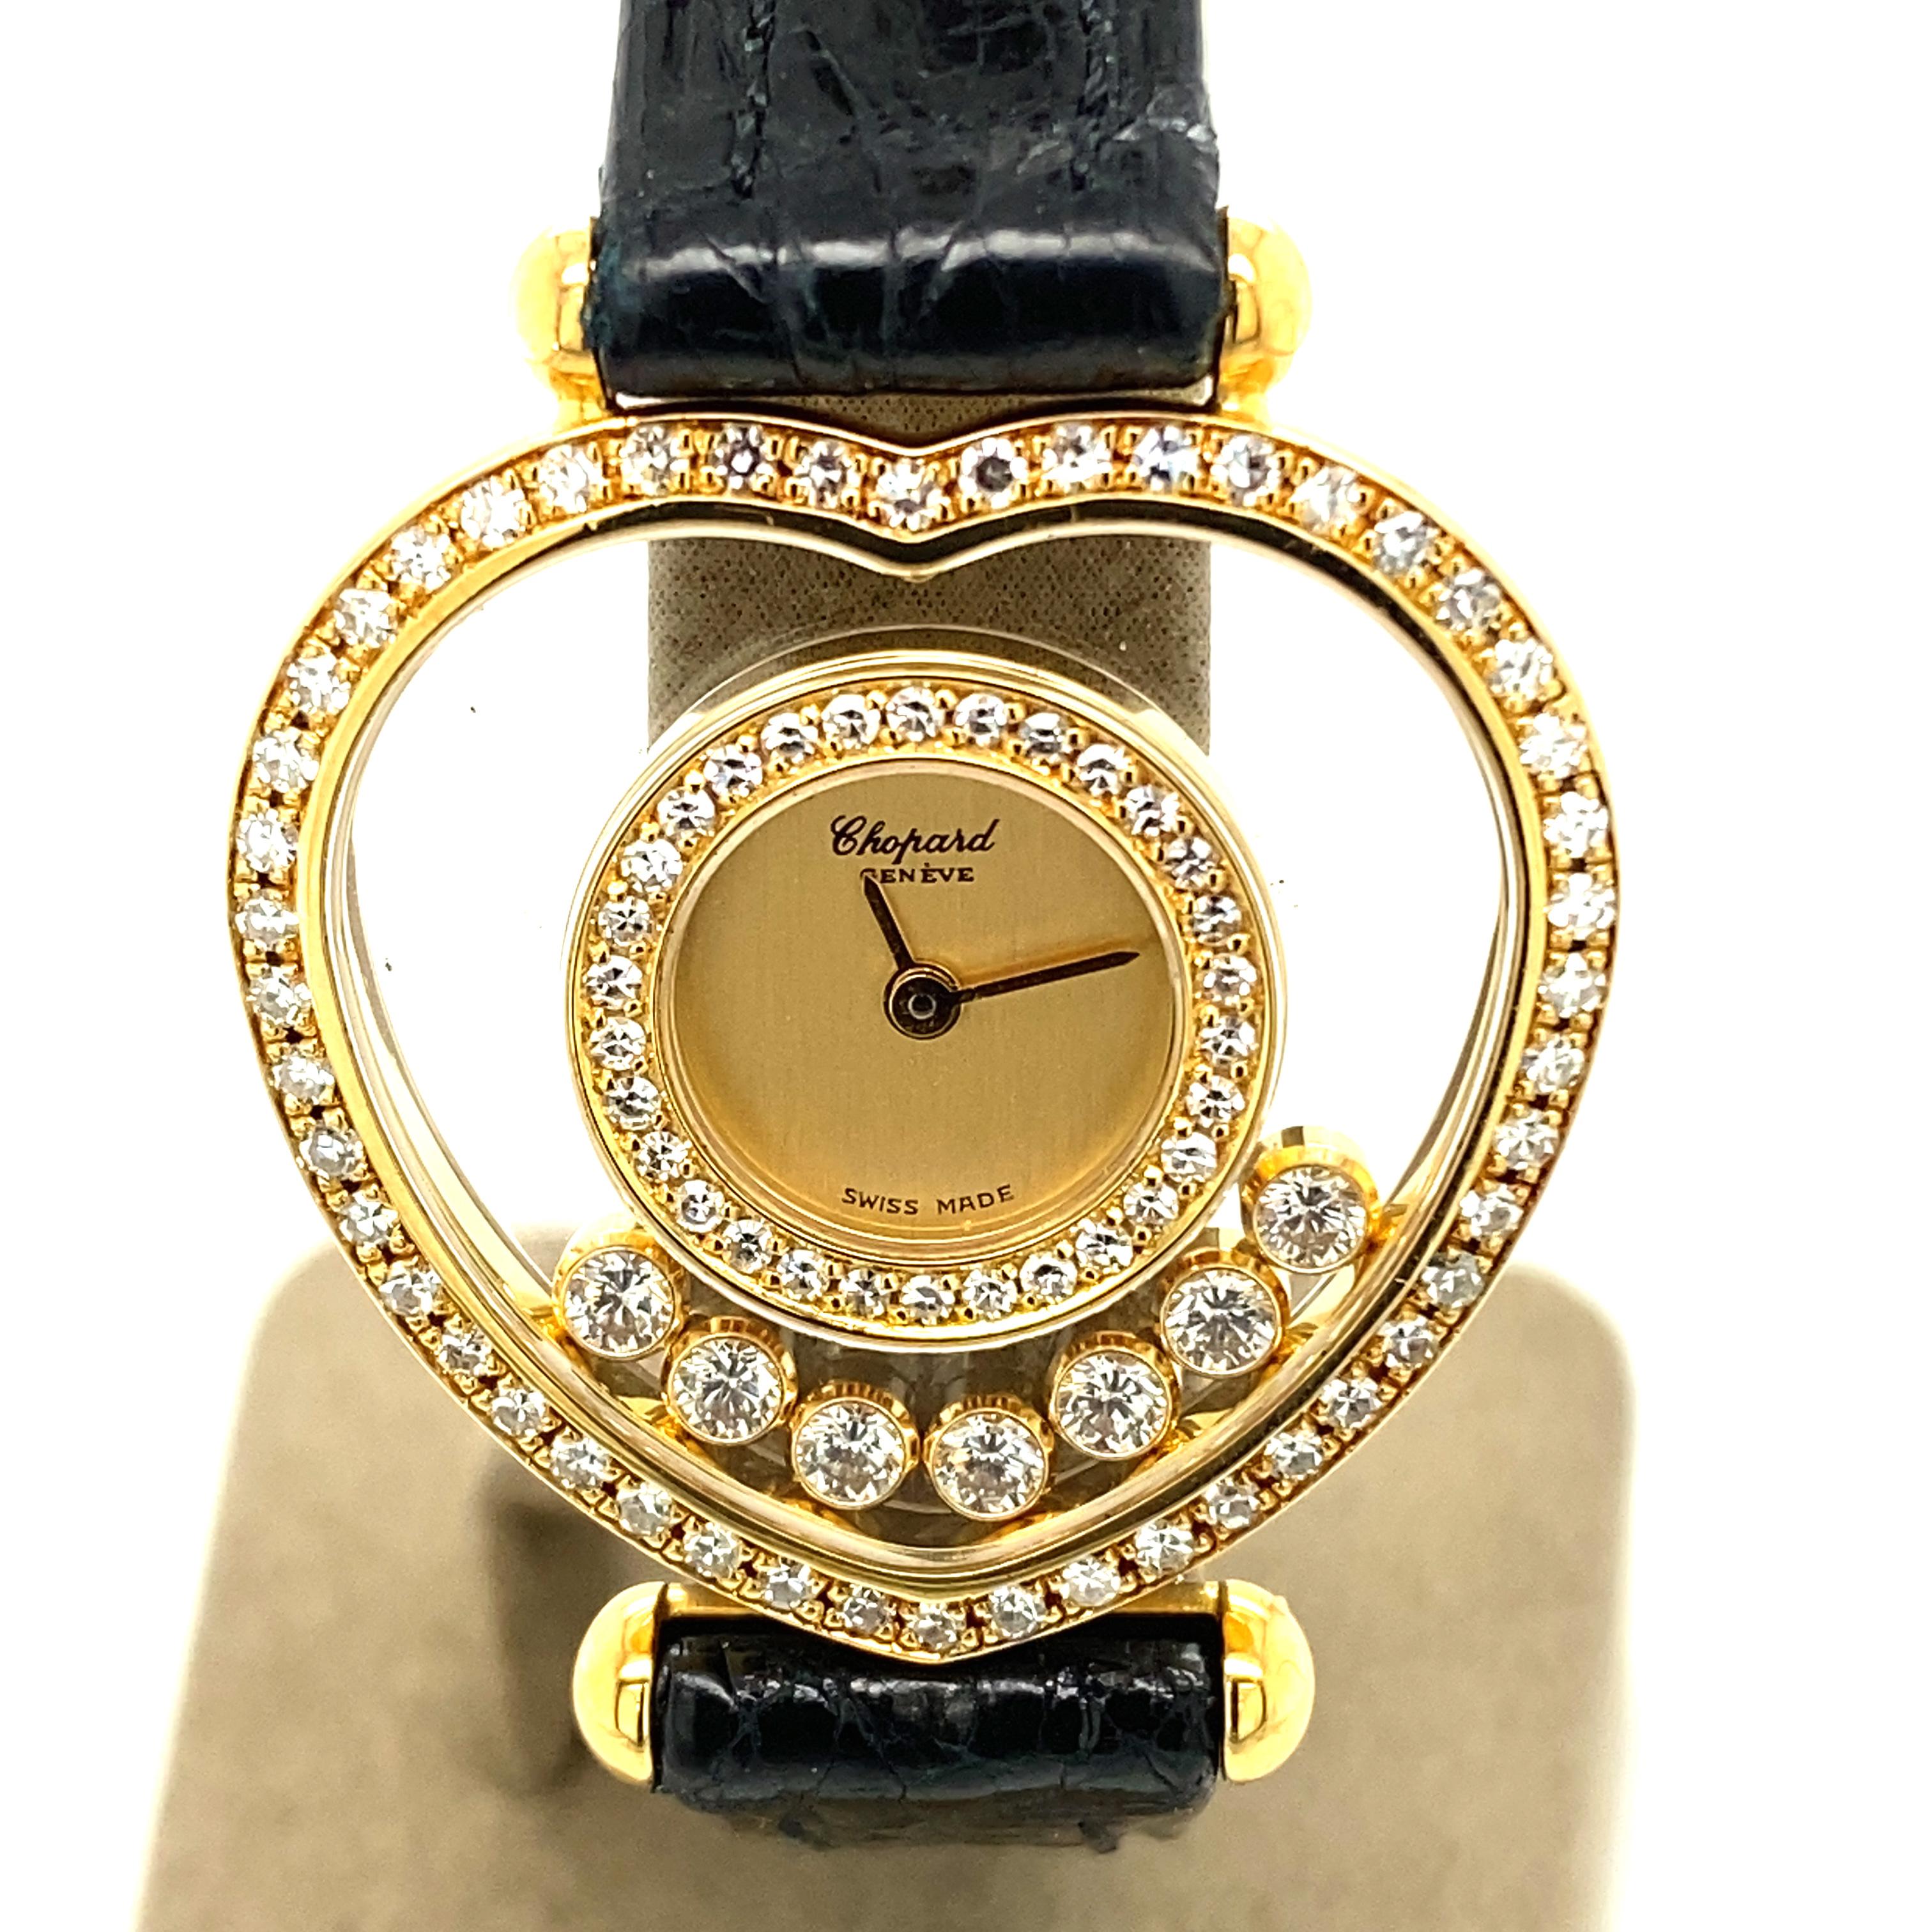 This elegant ladies' watch by Swiss jeweller/watchmaker Chopard is crafted in 18 karat yellow gold. The double bezel is set with 77 single-cut diamonds and 7 'floating' brilliant-cut diamonds, weighing approximately 0.95 carats.

Comes in its